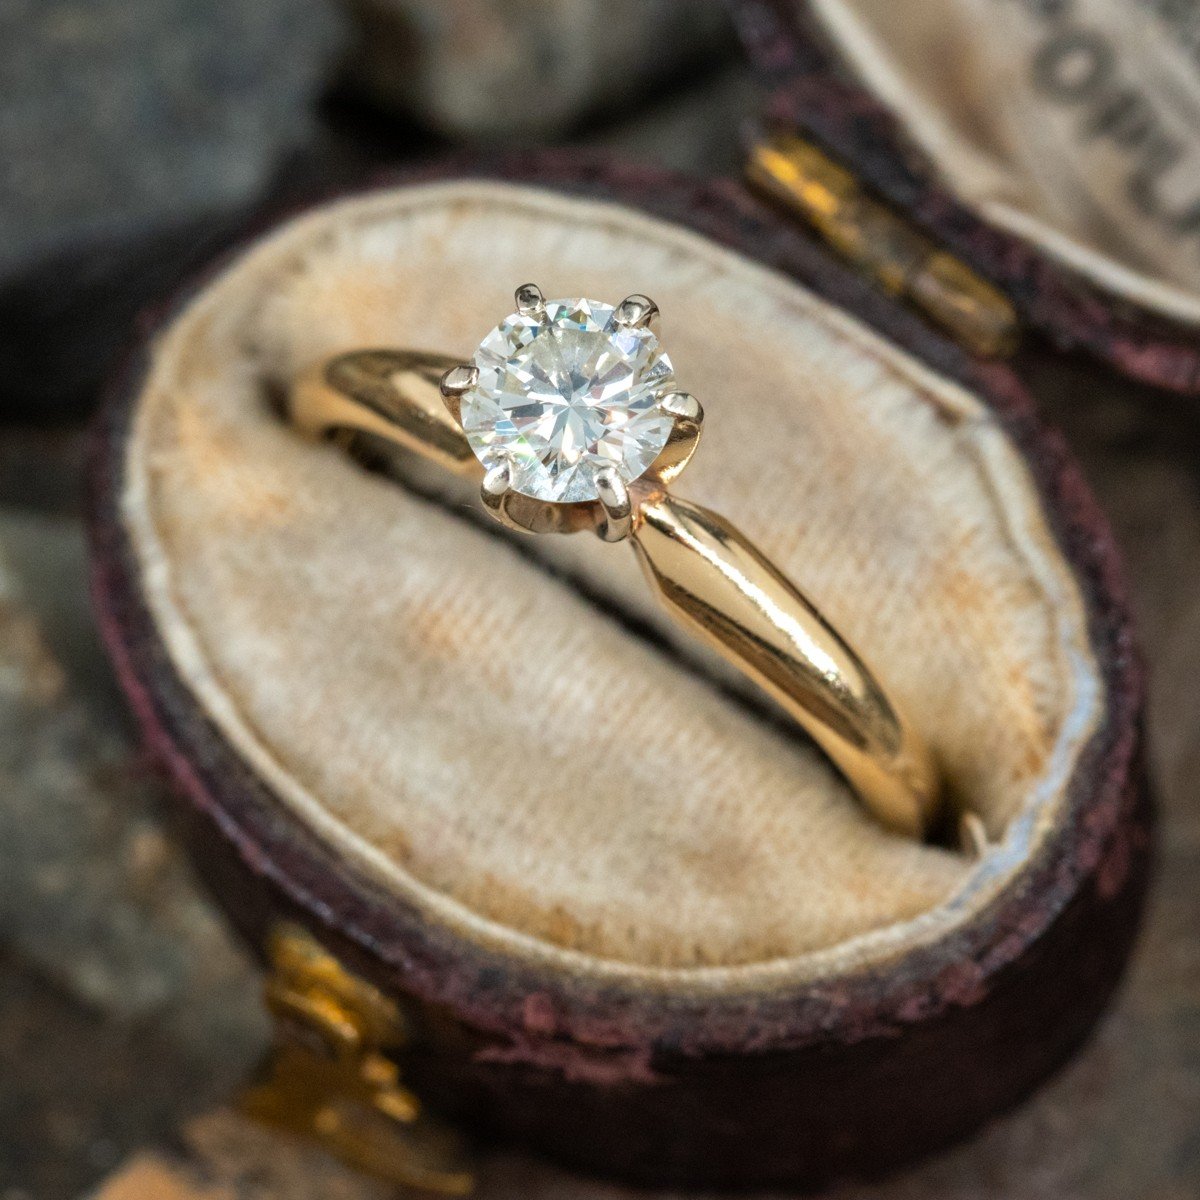 Classic Set of Gold Wedding Rings